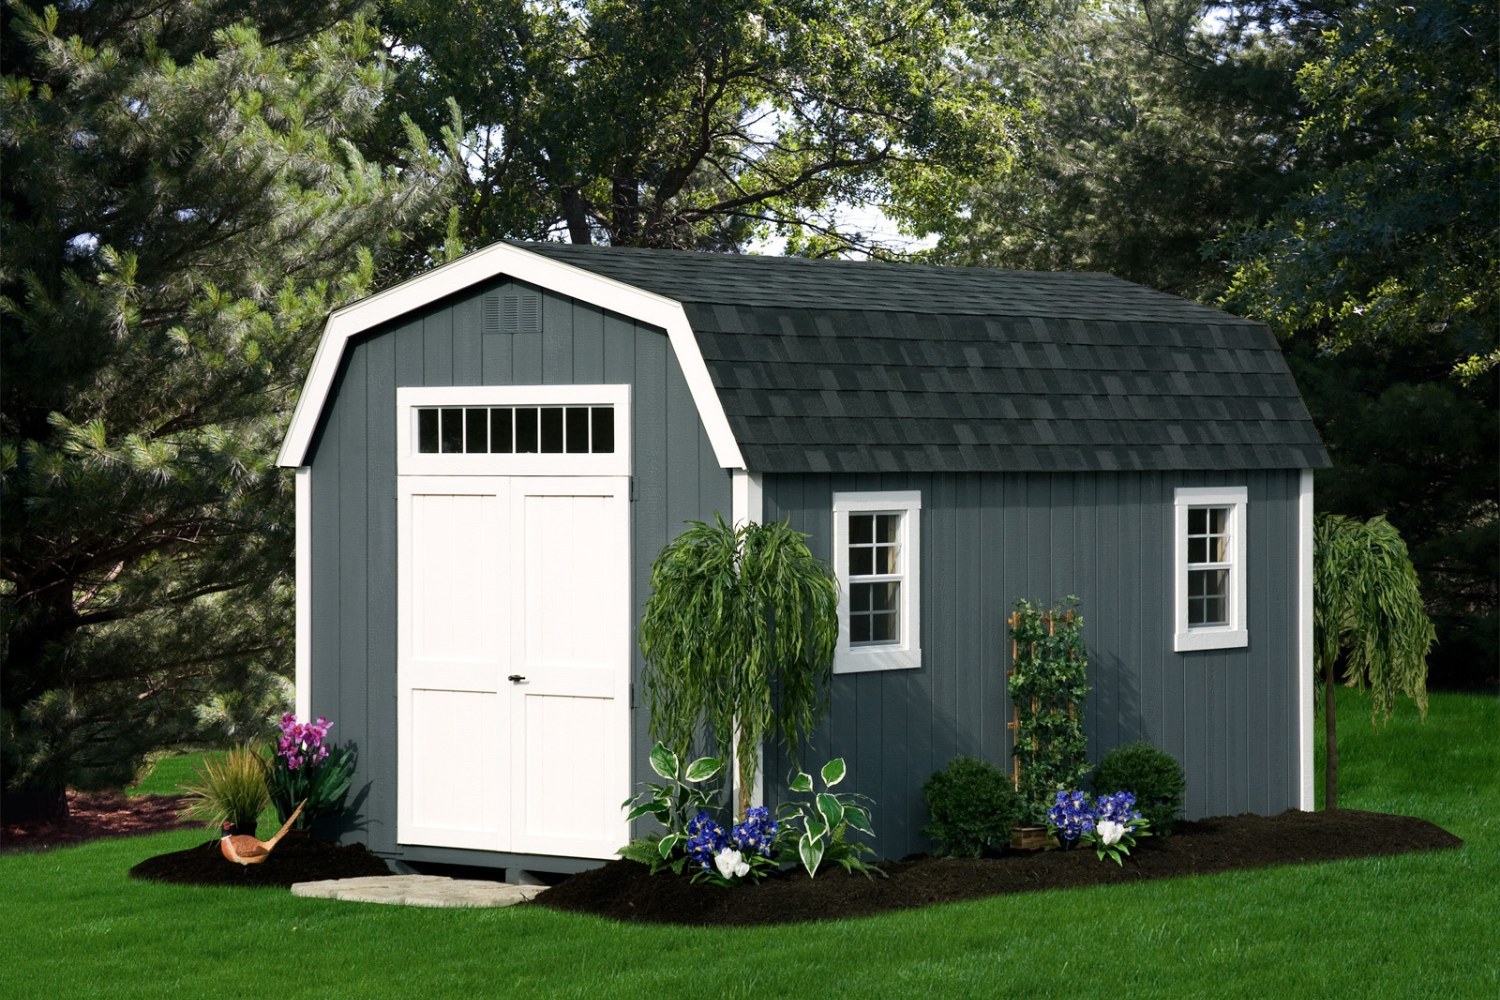 What are amish built sheds in MI